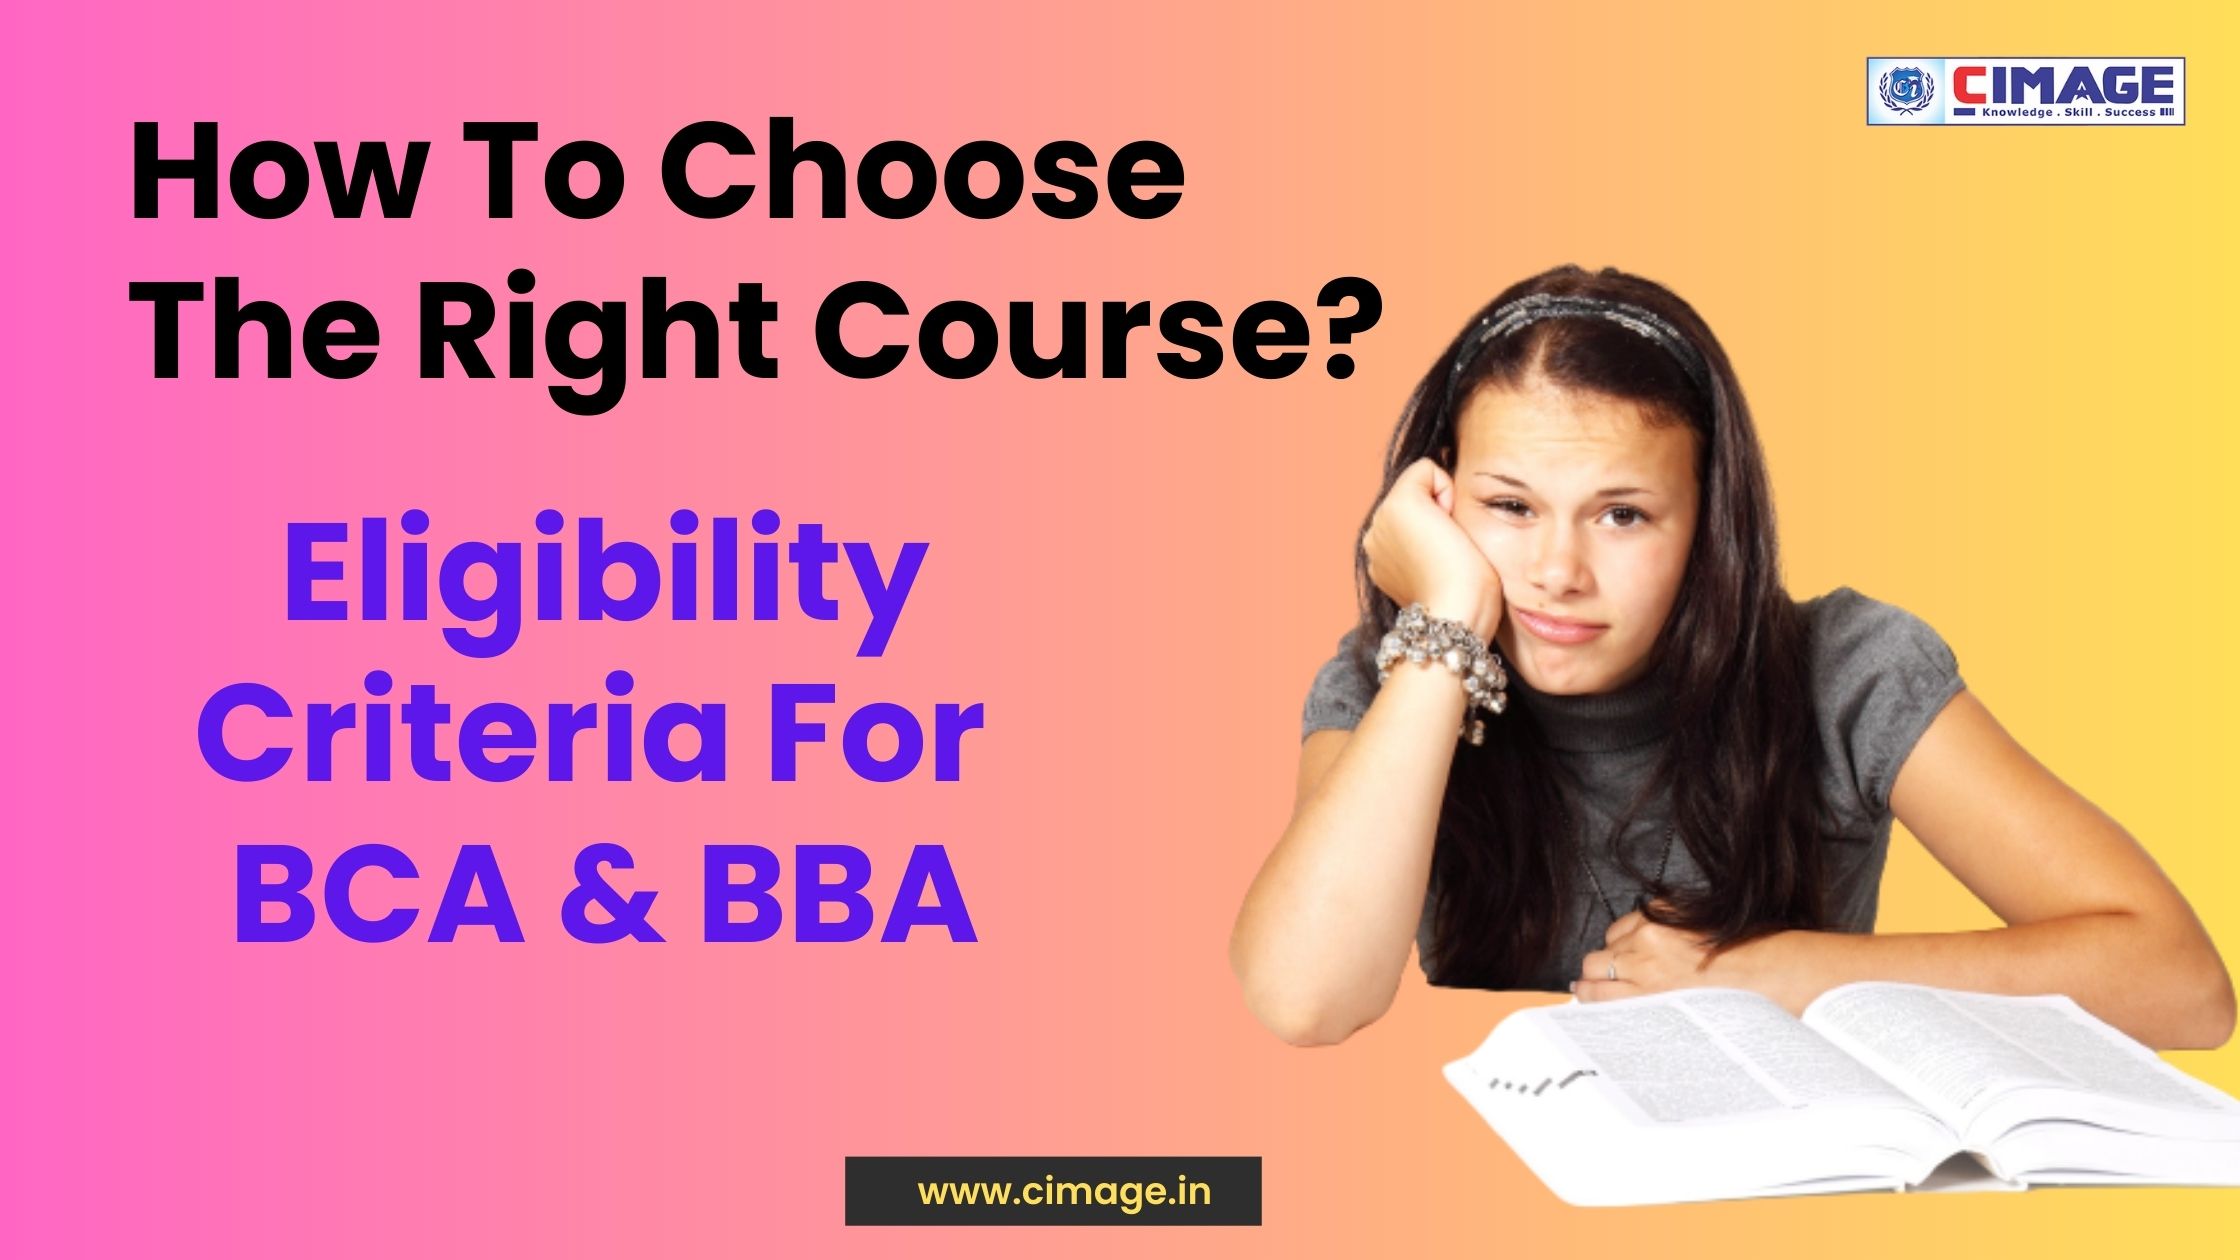 How To Choose The Right Course? What Are The Eligibility Criteria For BCA And BBA?>